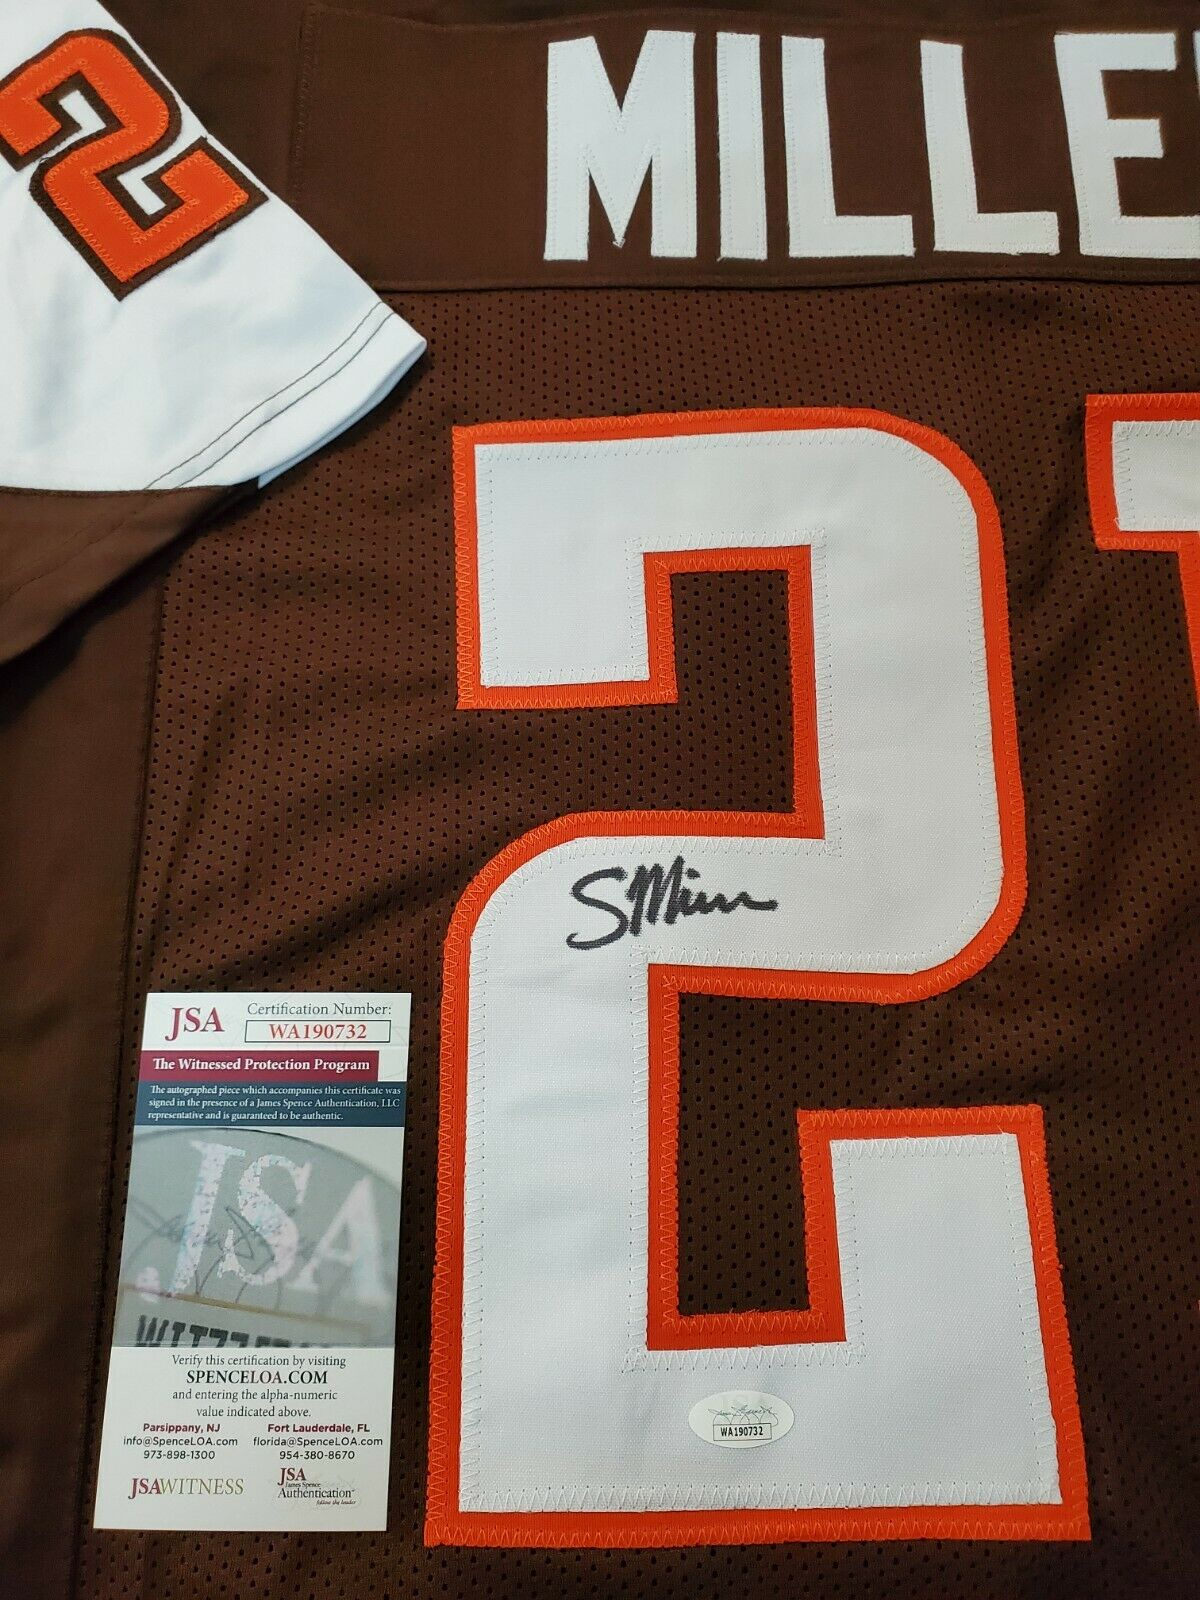 MVP Authentics Bowling Green Falcons Scotty Miller Autographed Signed Jersey Jsa Coa 112.50 sports jersey framing , jersey framing